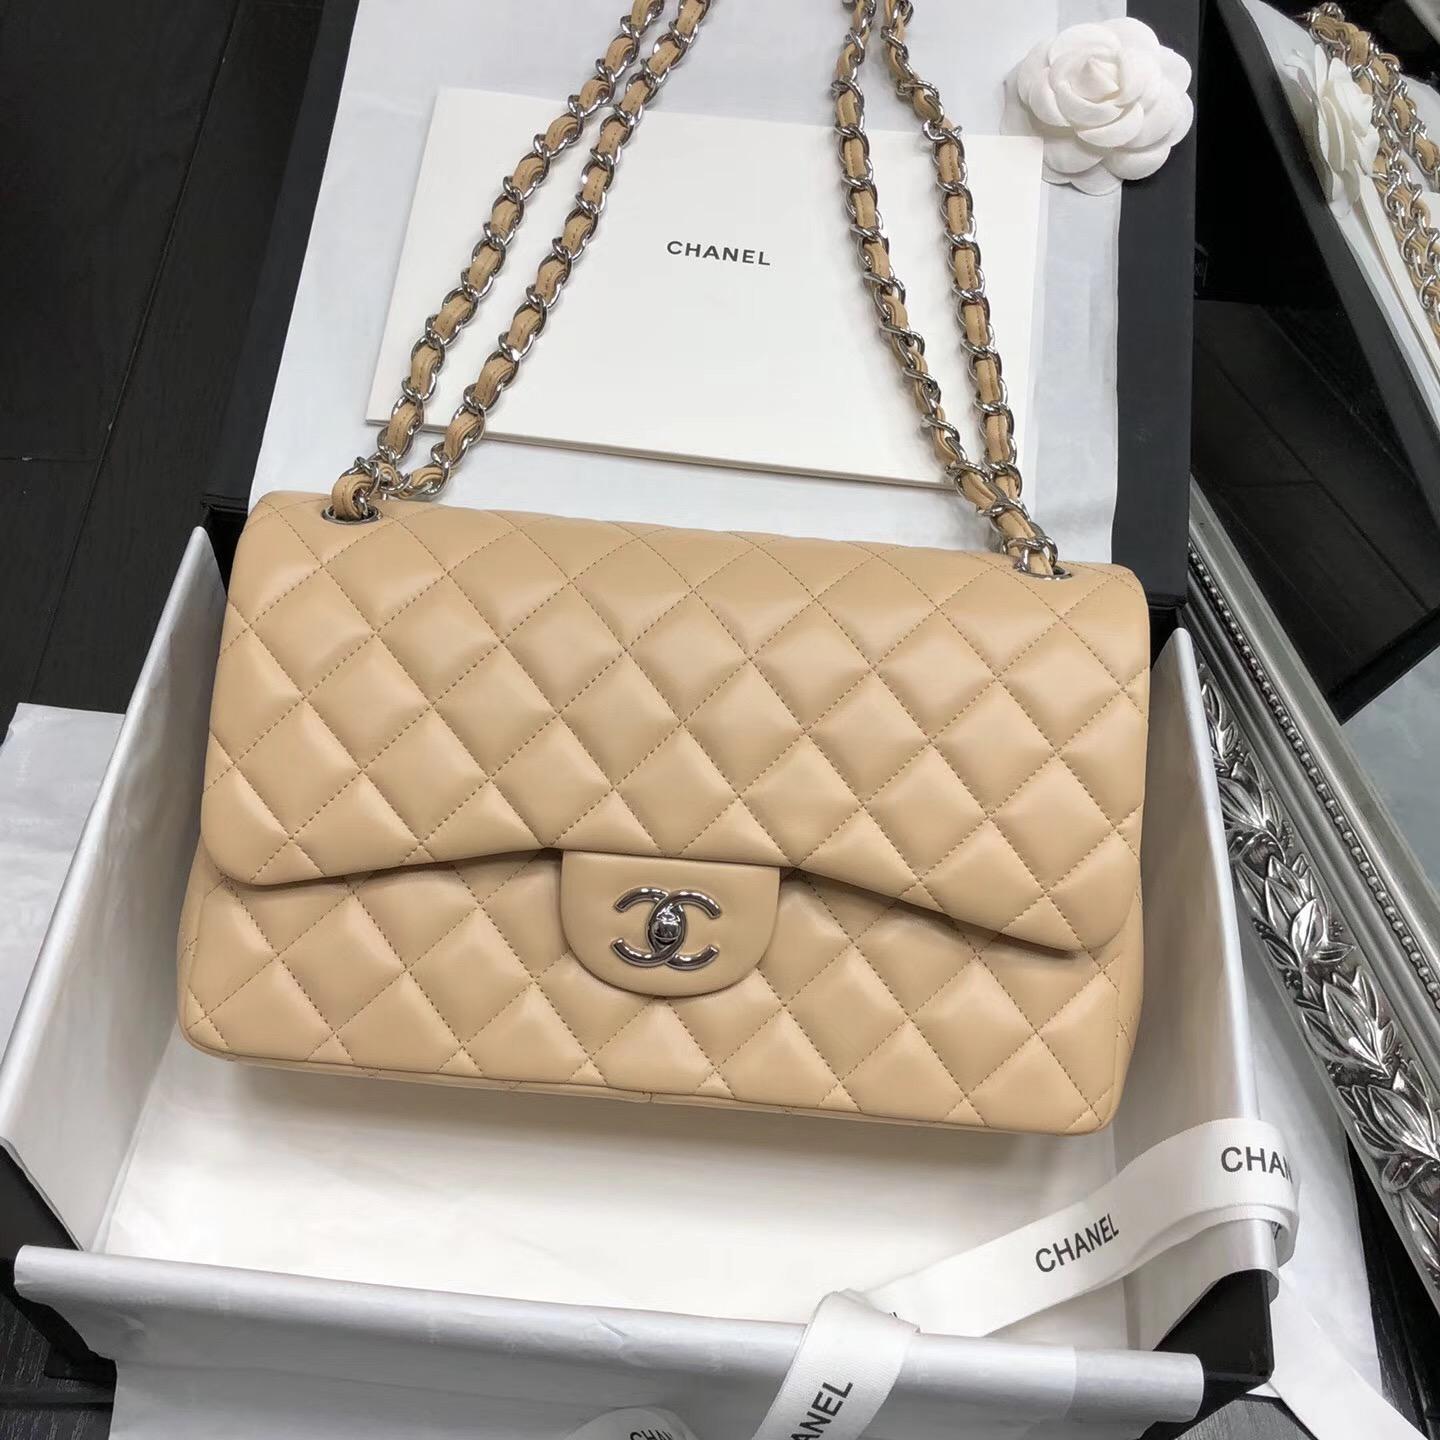 Best Chanel Inspired Handbags | Literacy Ontario Central South